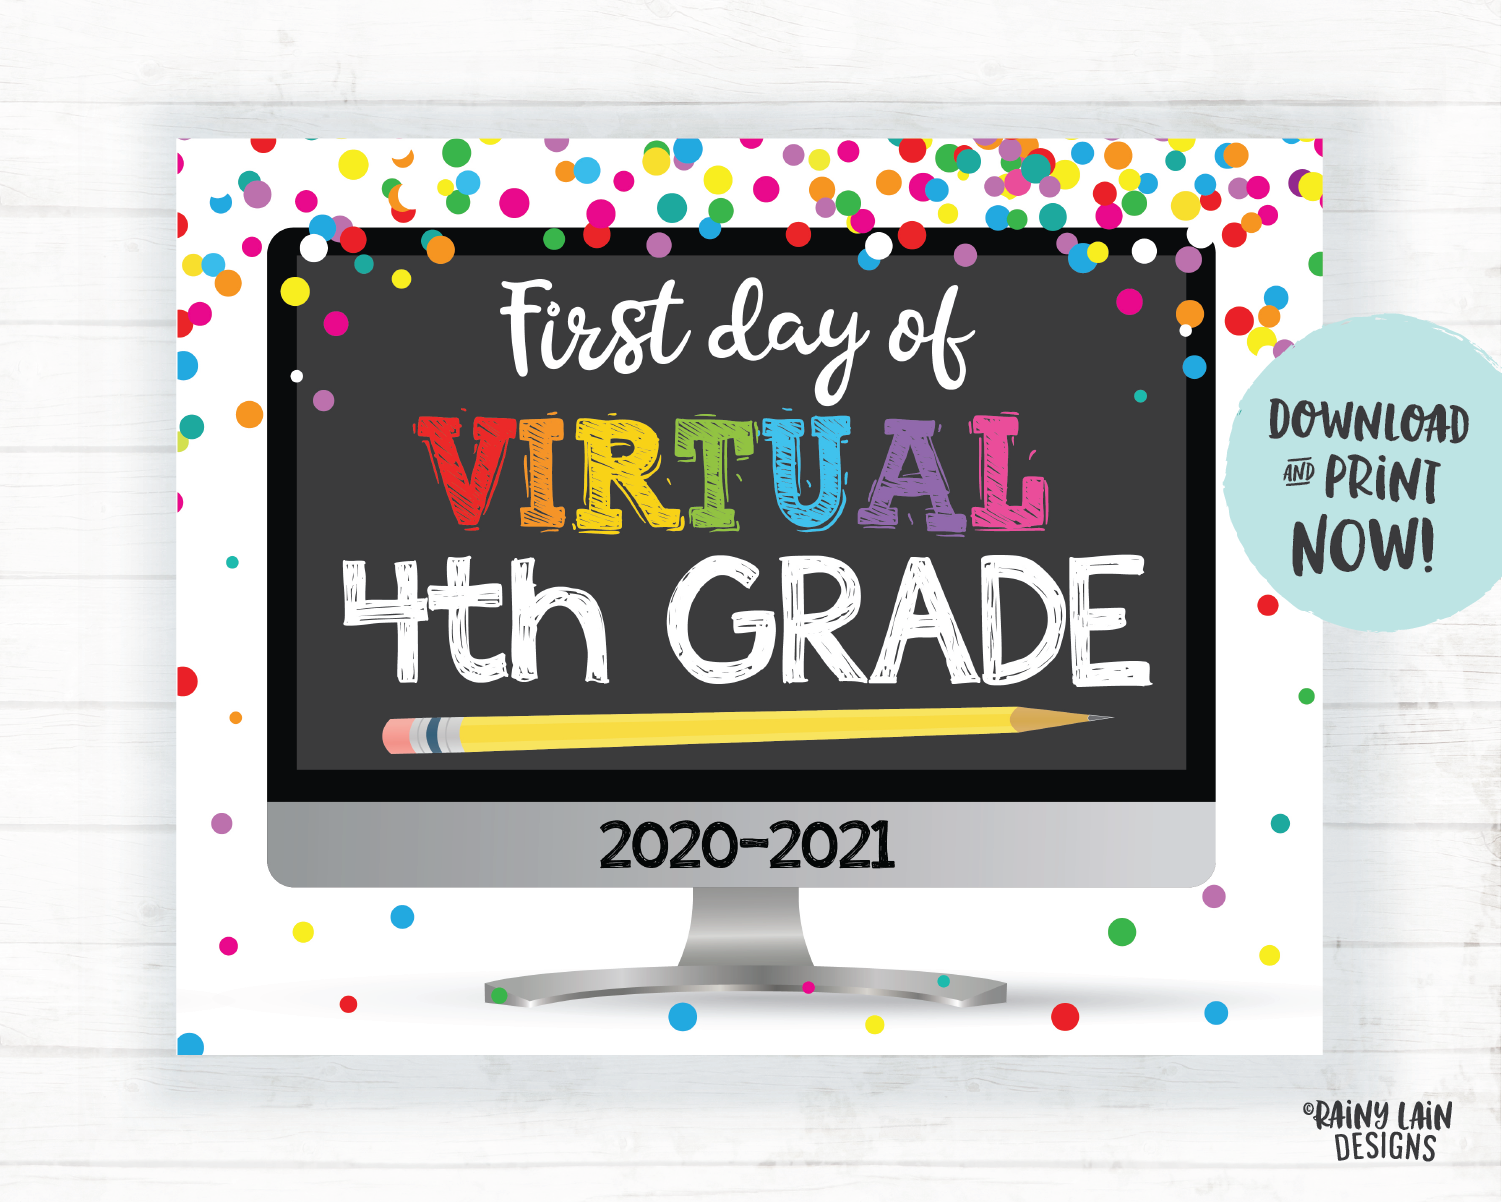 First Day of Virtual 4th Grade Sign, Virtual School Sign, First Day of School Distance Learning, E-Learning, Online School, Home School